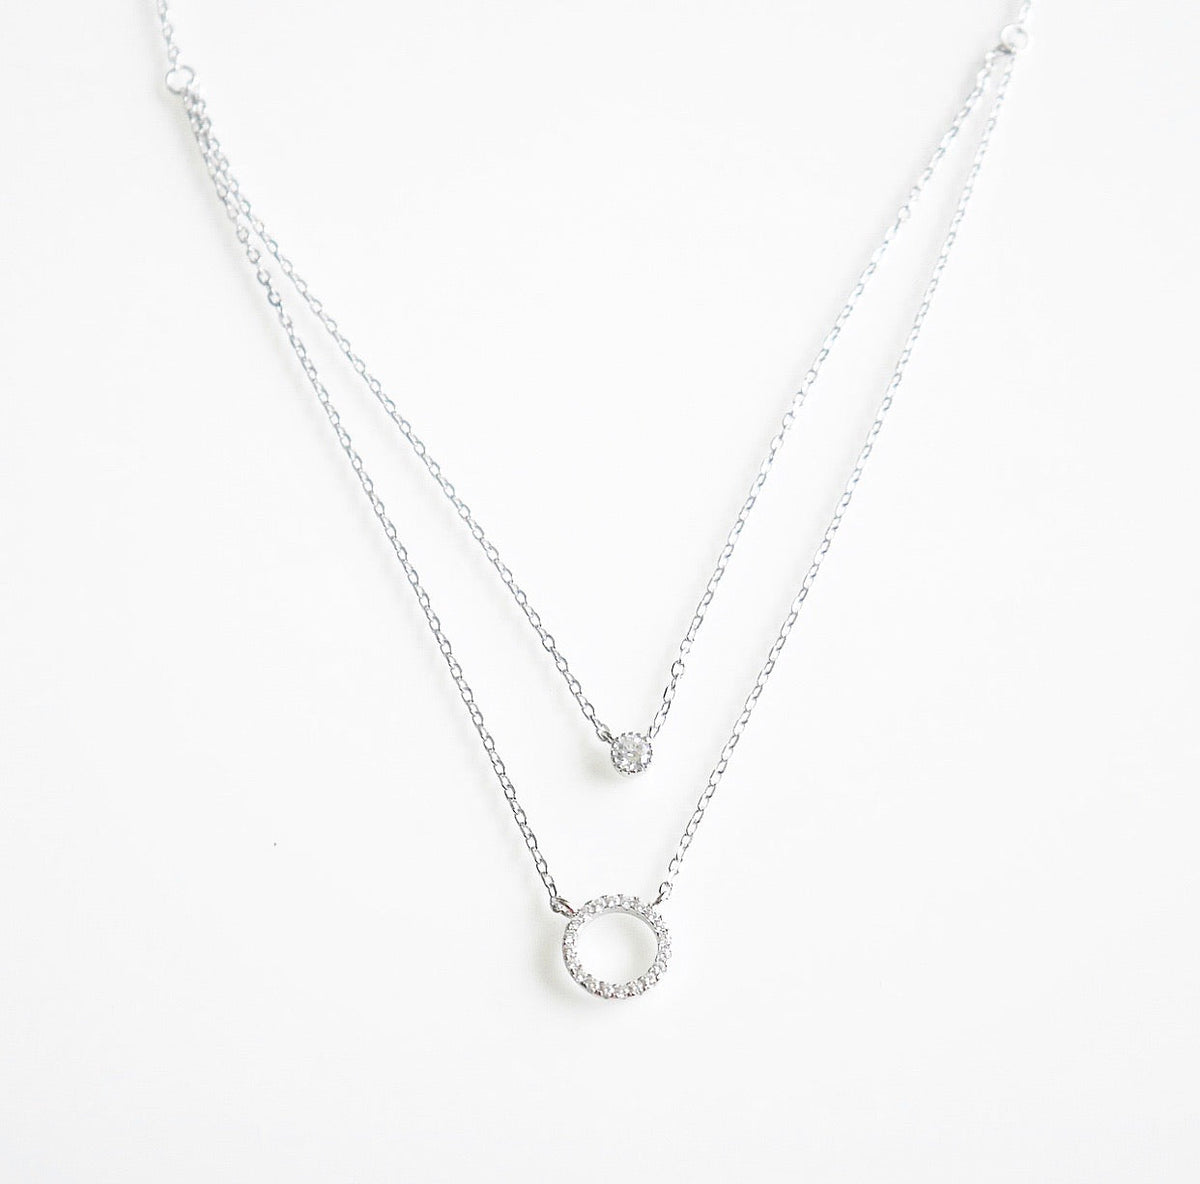 circle necklace, layered double circle diamond zircon .925 sterling silver necklace waterproof for sensitive skin - cute necklaces for gift ideas, trending popular influencer style necklaces